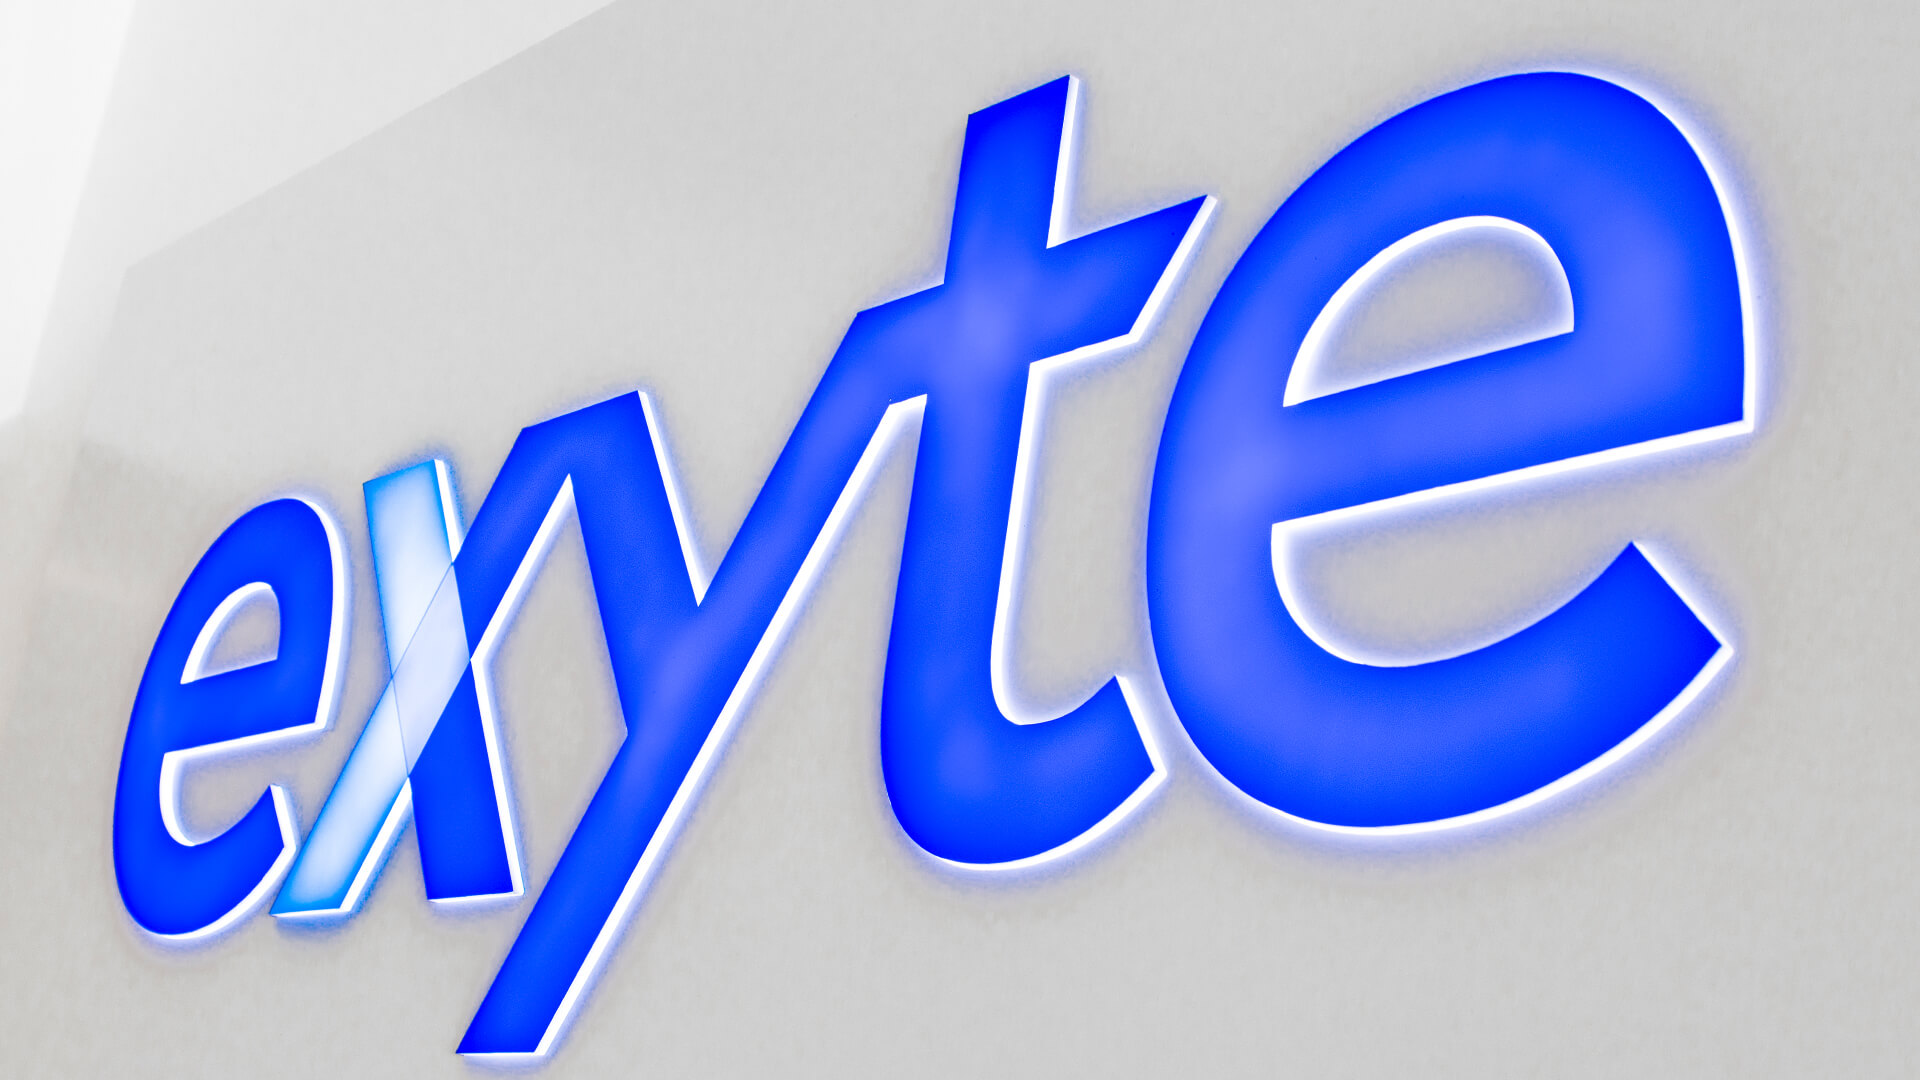 salida exyte - exyte-cashboard-on-the-wall-interior-of-the-office-behind-the-reception-blue-logo-back-lit-cashboard-for-order-gdansk-park-technological-scientific